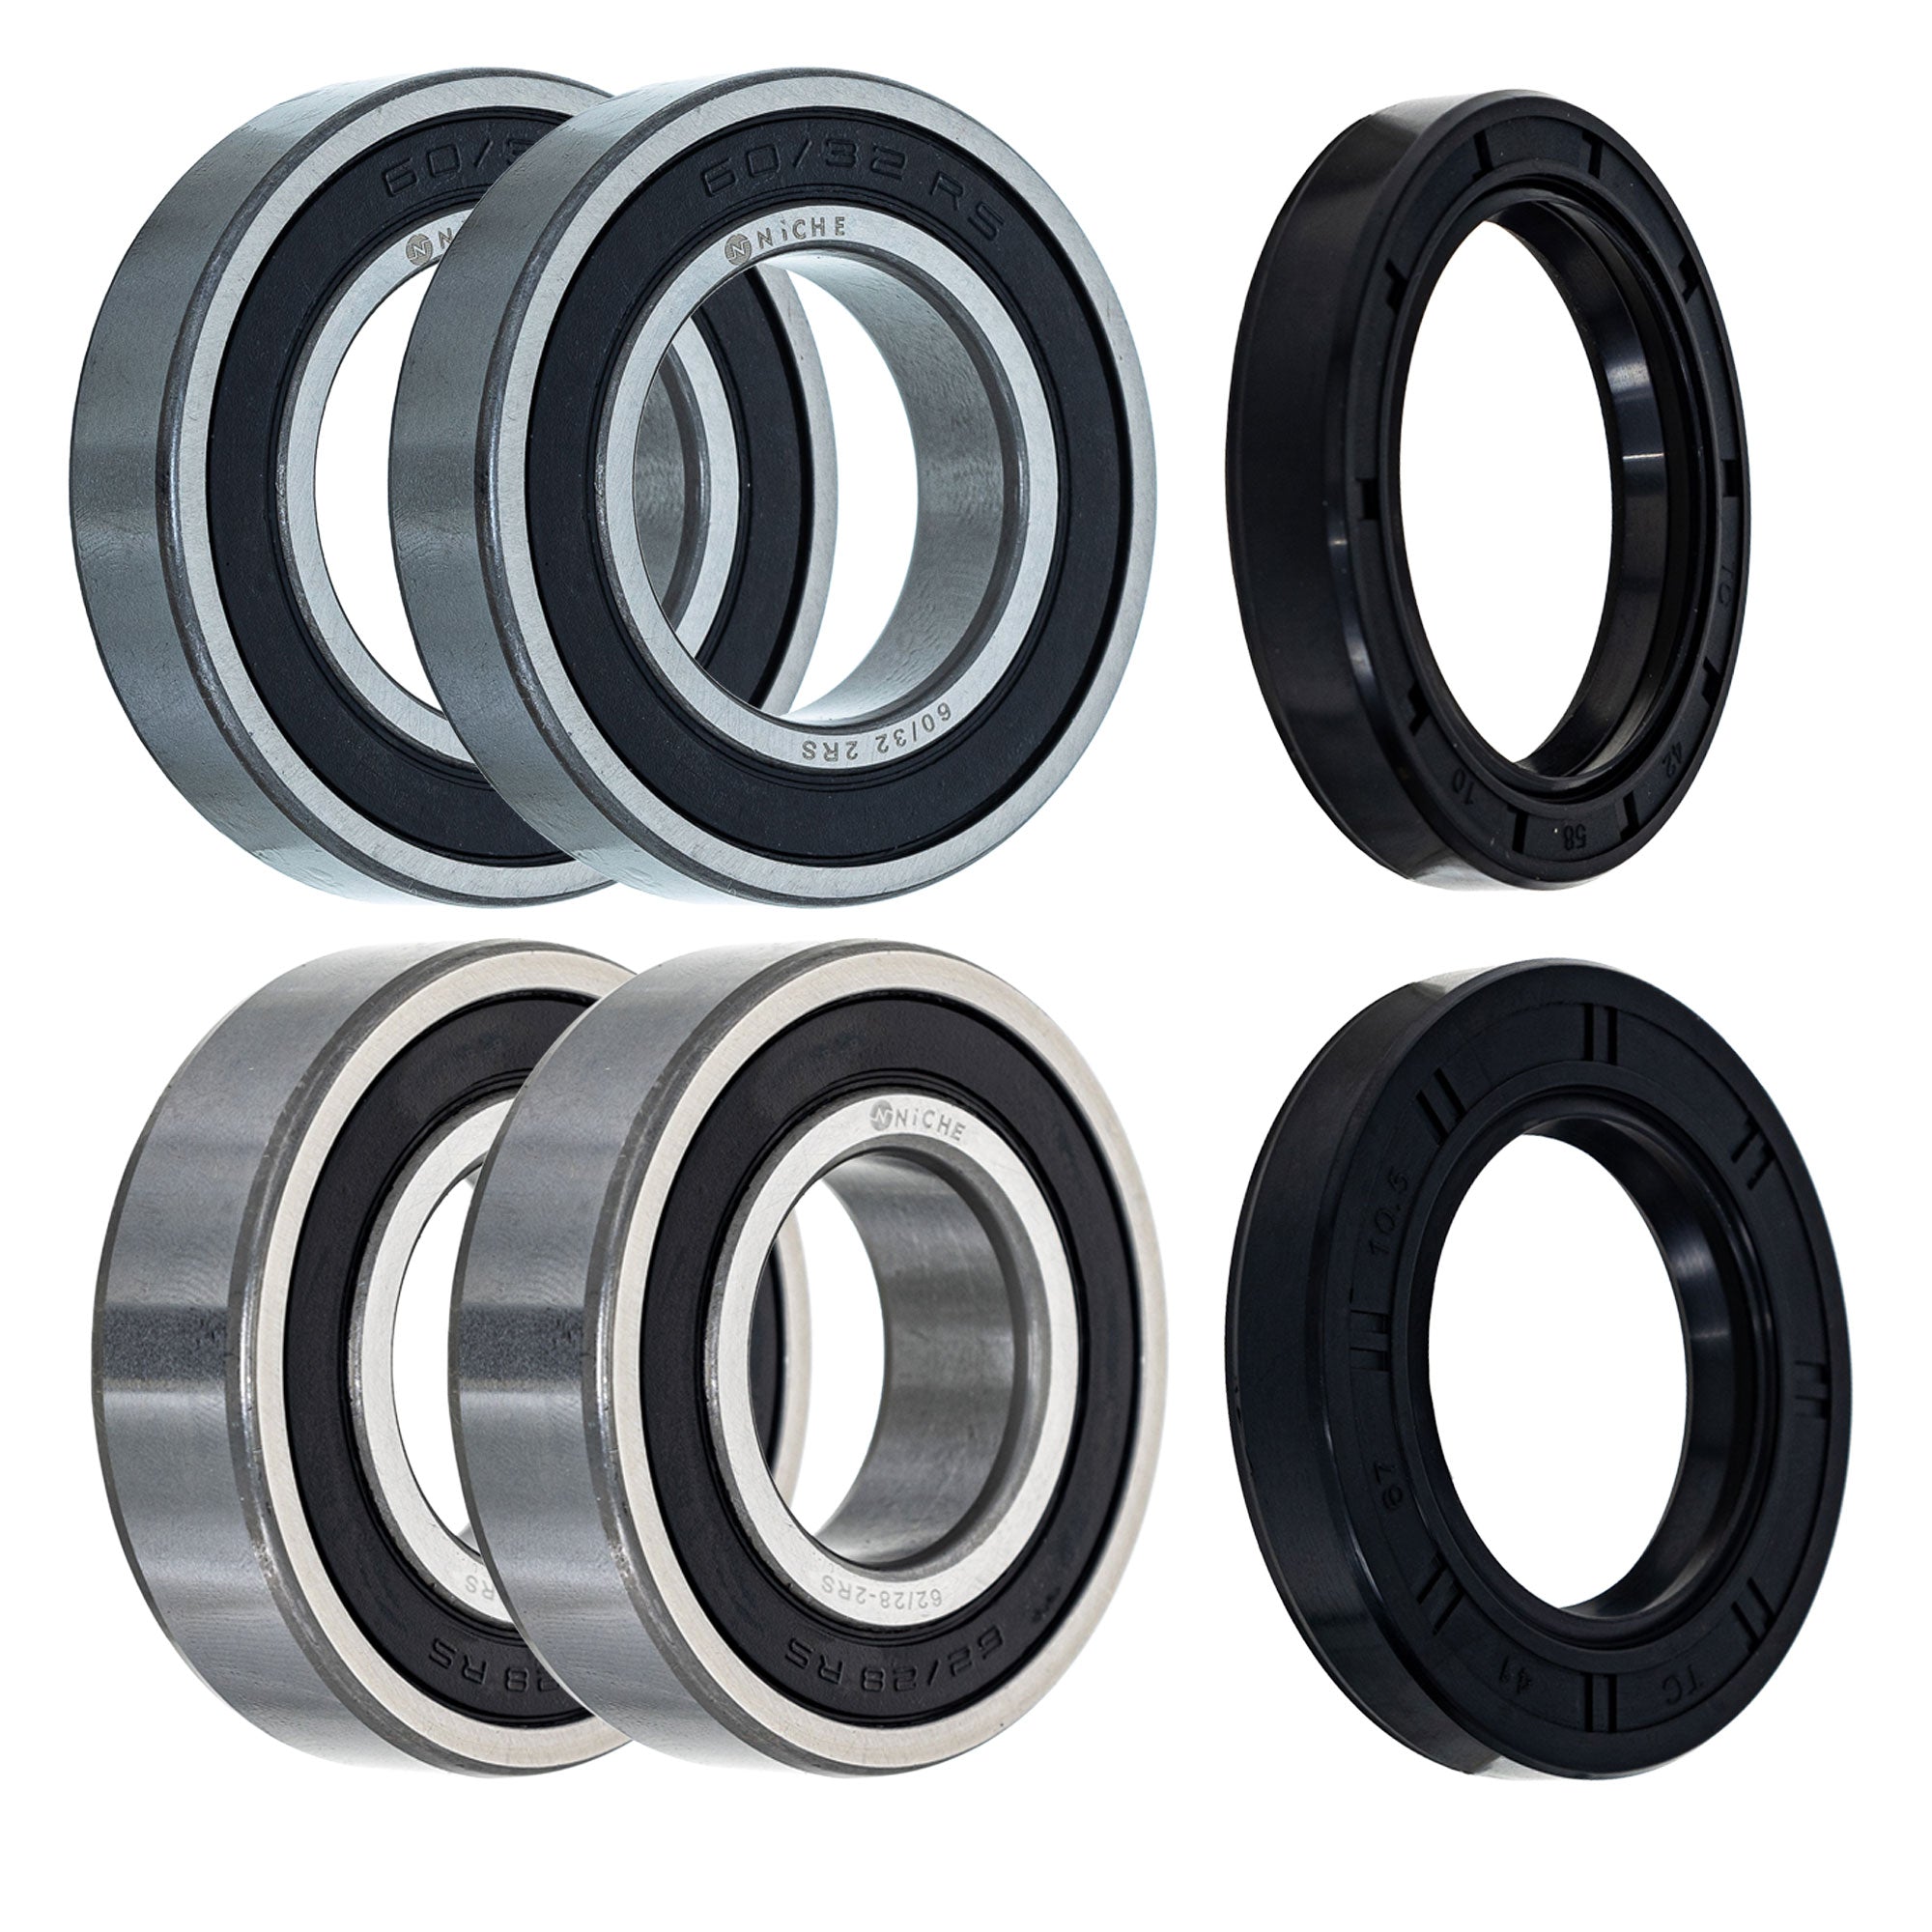 Wheel Bearing Seal Kit for zOTHER FourTrax NICHE MK1008926